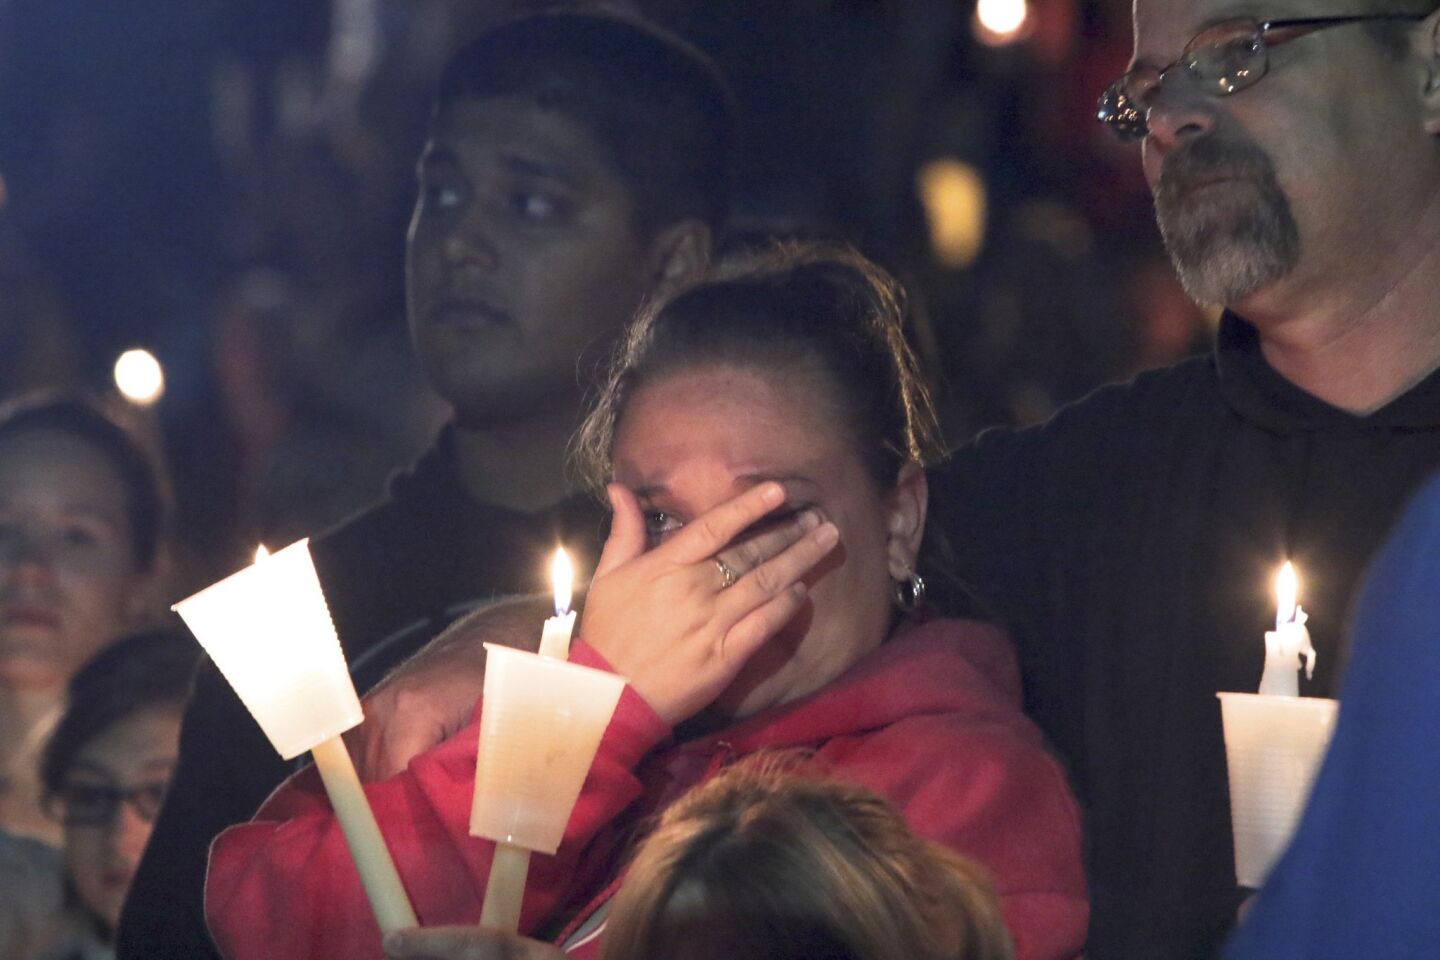 Residents of Roseburg, Ore., gather at an Oct. 1 candlelight vigil for the victims of the shooting at Umpqua Community College earlier in the day.